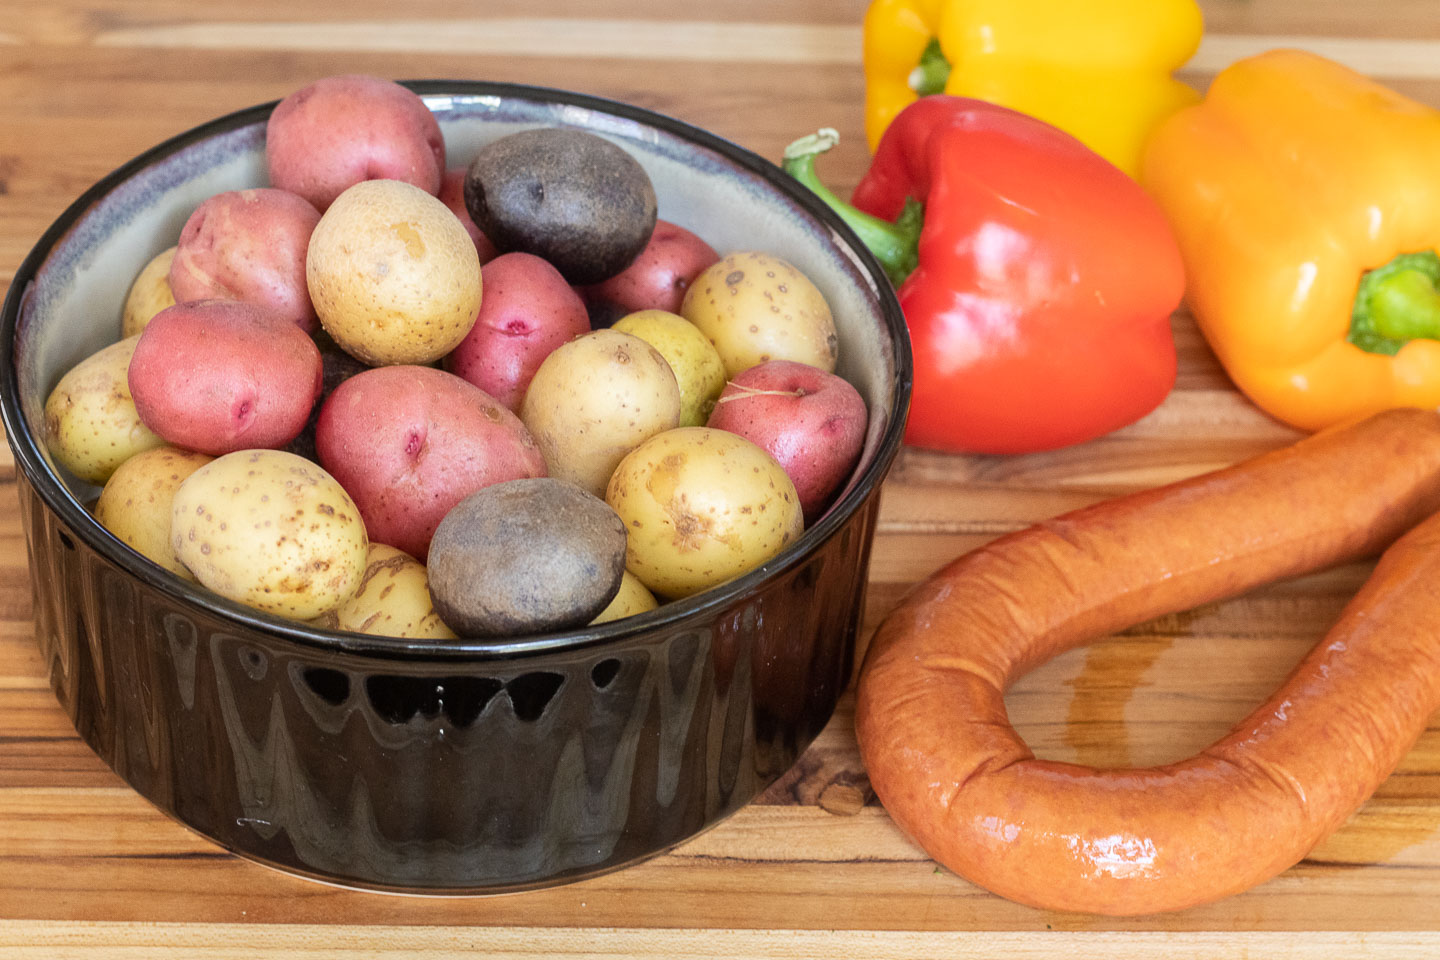 white, red, and purple whole baby potatoes in black bowl; smoked beef ring; red, yellow, and orange bell peppers